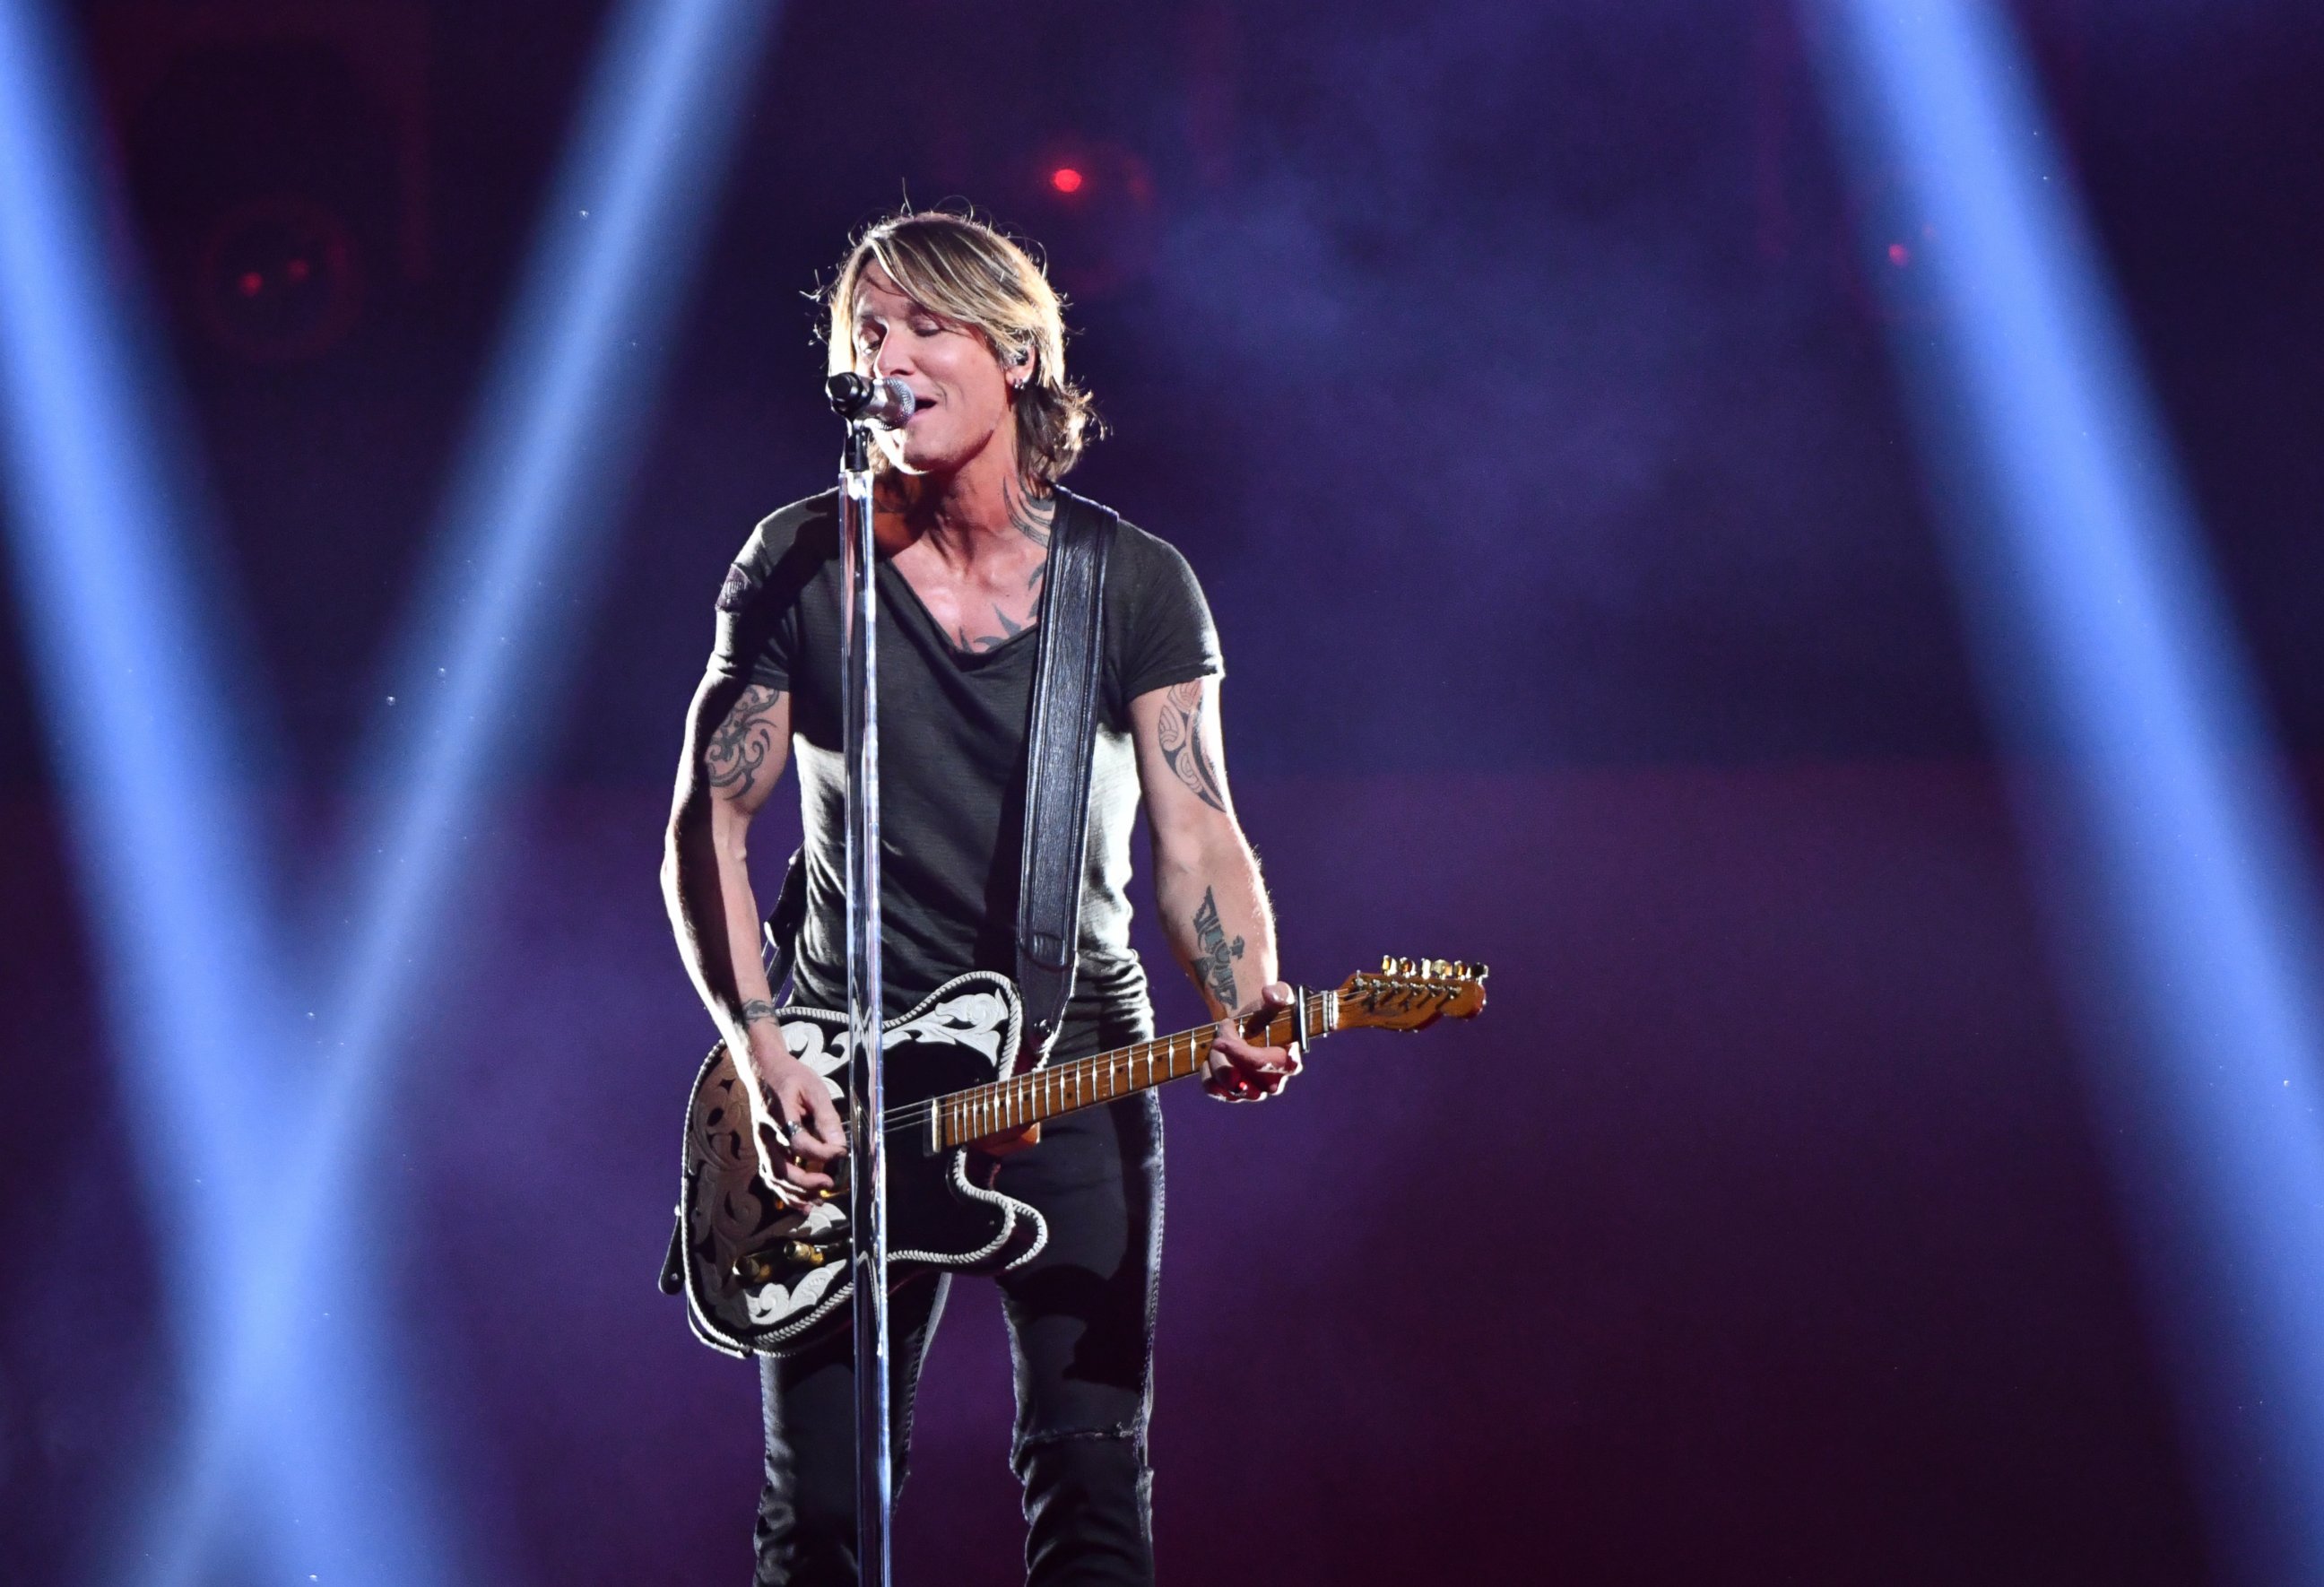 PHOTO: Keith Urban performs "Never Comin' Down" at the 52nd annual CMA Awards at Bridgestone Arena on Wednesday, Nov. 14, 2018, in Nashville, Tenn.